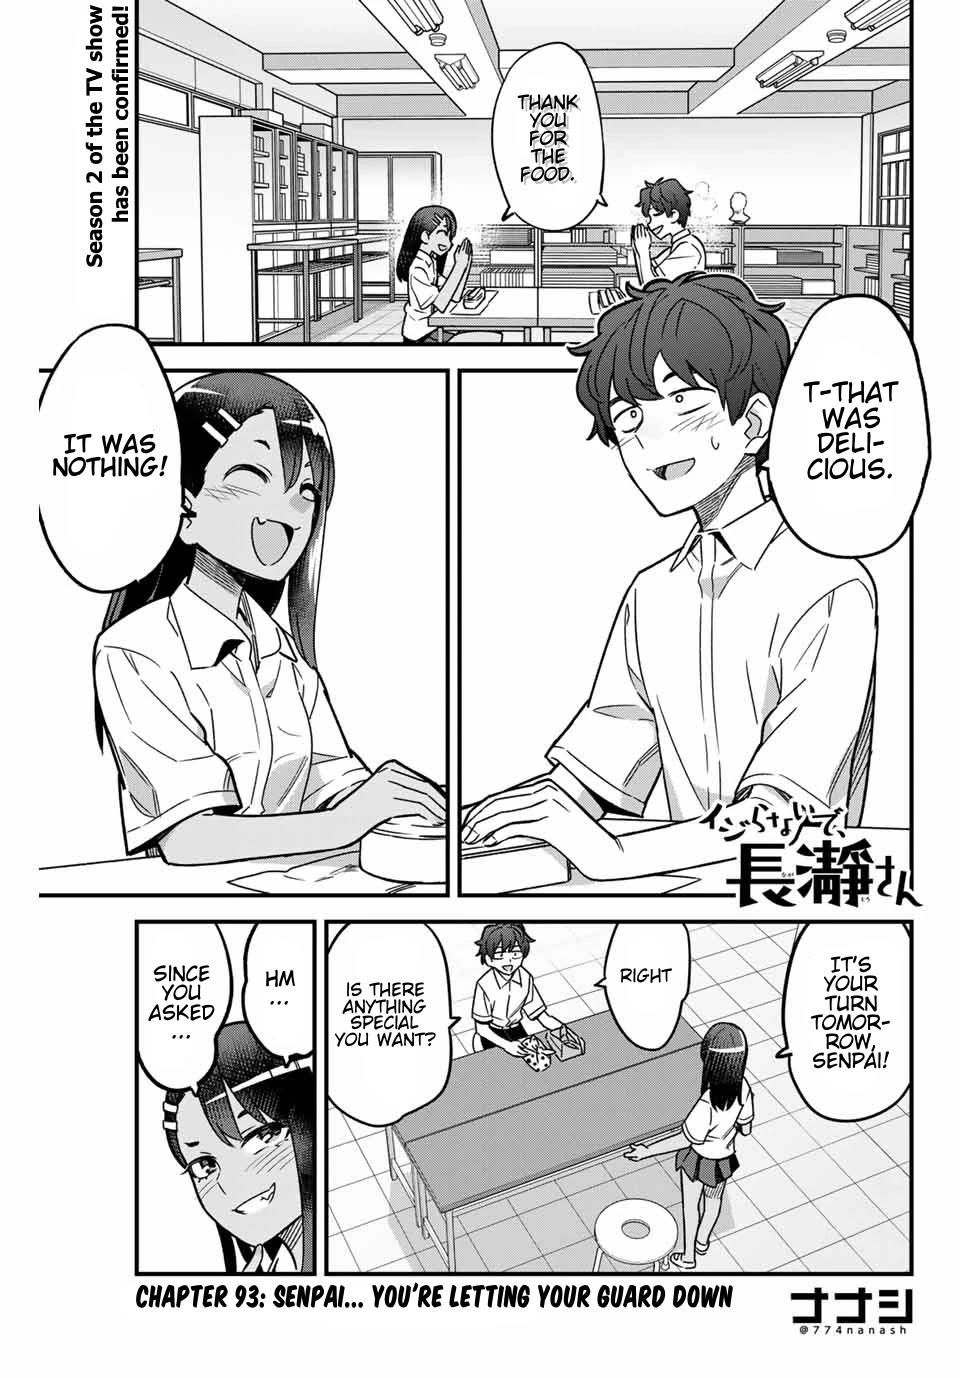 Don't Toy With Me, Miss Nagatoro, Chapter 86 - Don't Toy With Me